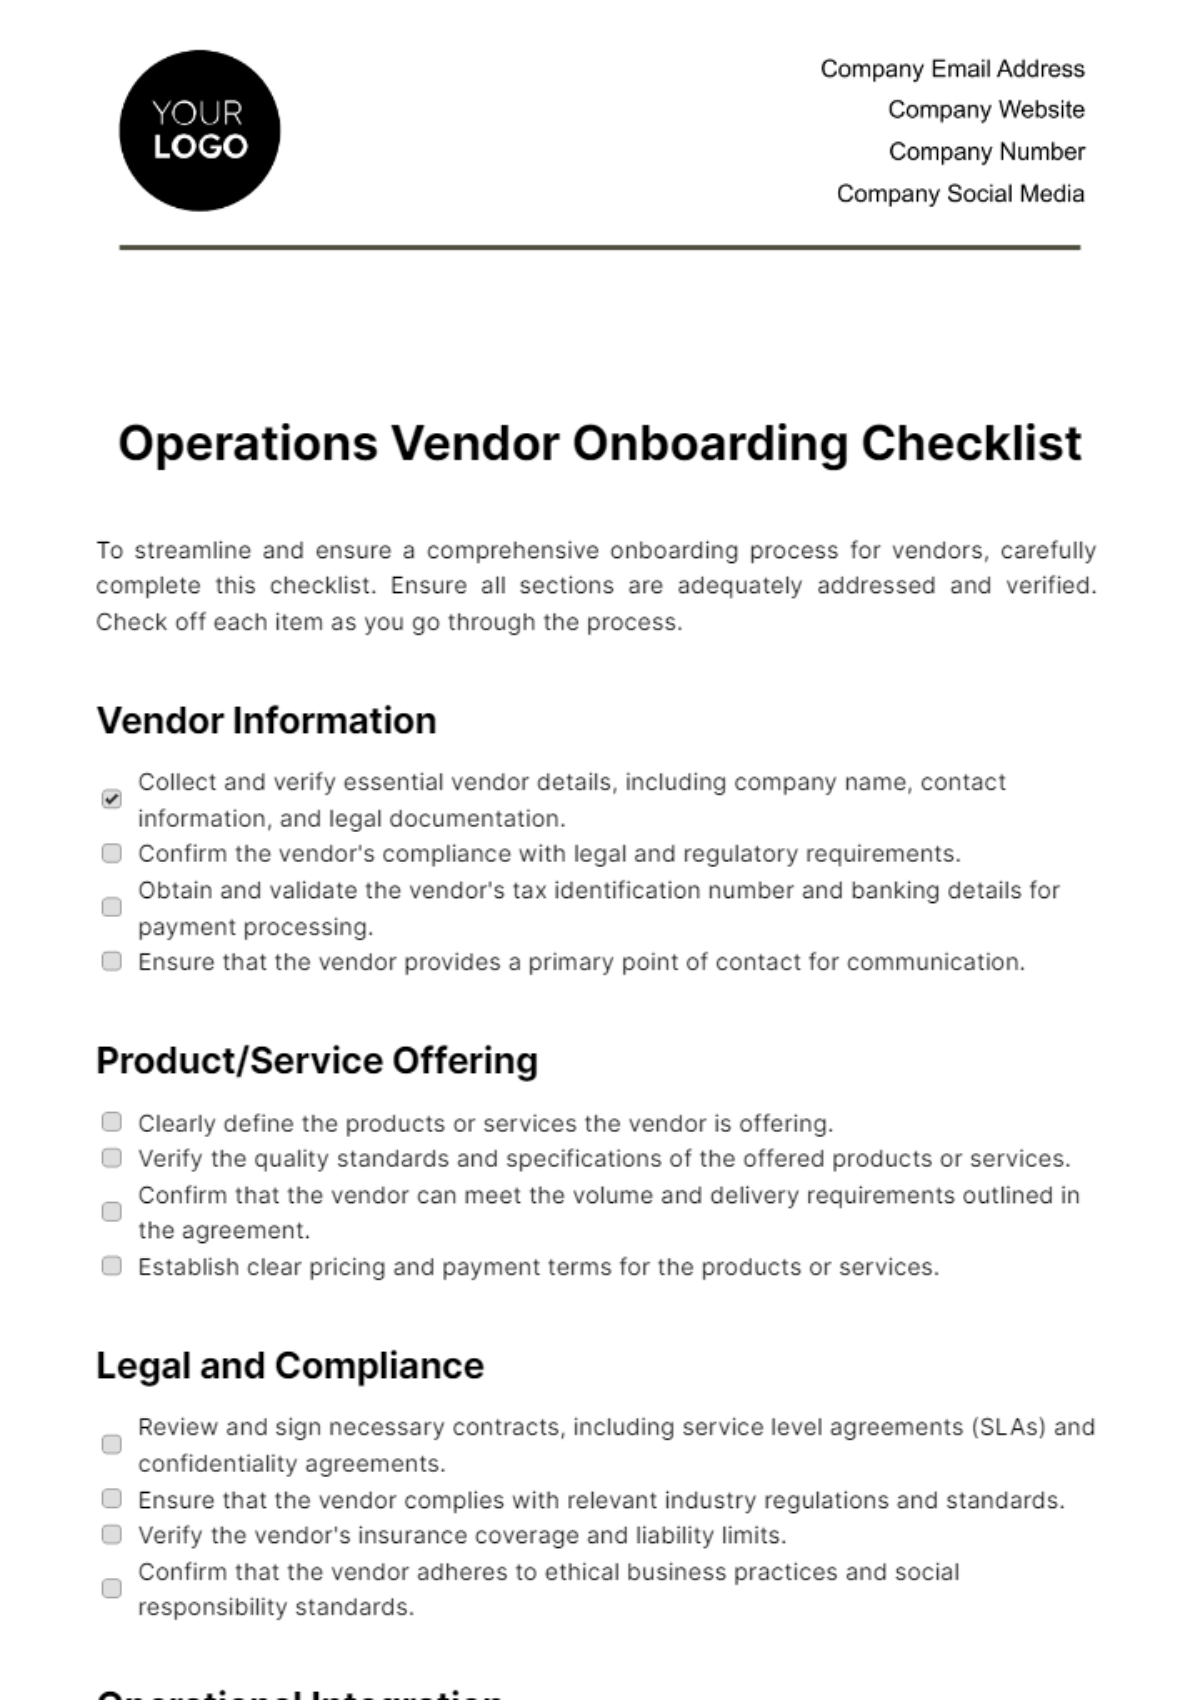 Free Operations Vendor Onboarding Checklist Template